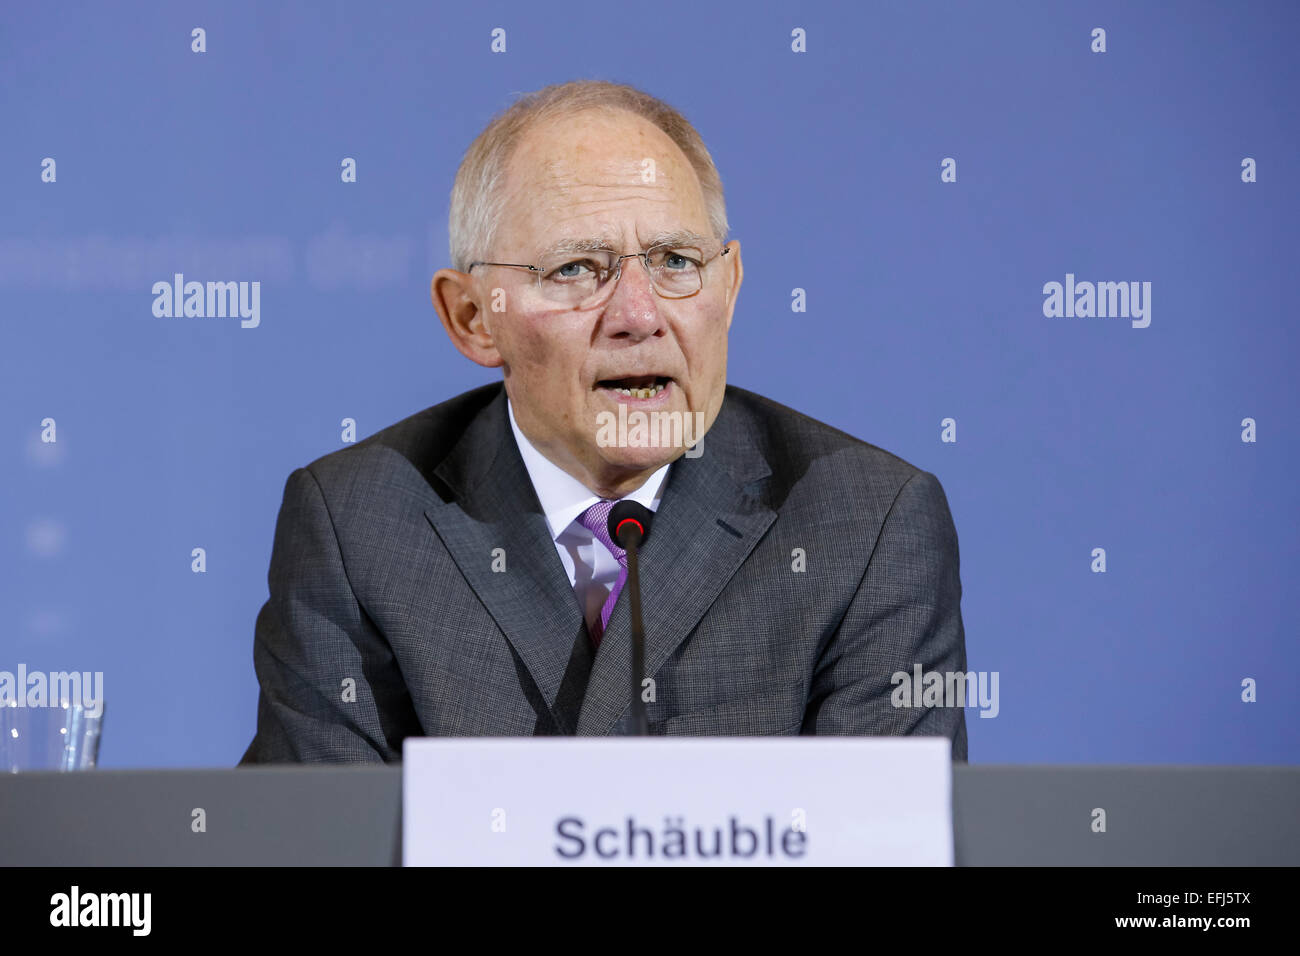 Berlin, Germany. 05th Feb, 2015. Wolfgang Schäuble (CDU), German Minister of Finance, and Yanis Varoufakis, Greek Minister of Finance during press conference after bilateral meeting realized at the German Ministery of Finance  on February 05, 2015 in Berlin, Germany. / Picture: Wolfgang Schäuble (CDU), German Minister of Finance, aside Yanis Varoufakis, Greek Minister of Finance,  during joint press conference in Berlin. © Reynaldo Chaib Paganelli/Alamy Live News Credit:  Reynaldo Chaib Paganelli/Alamy Live News Stock Photo